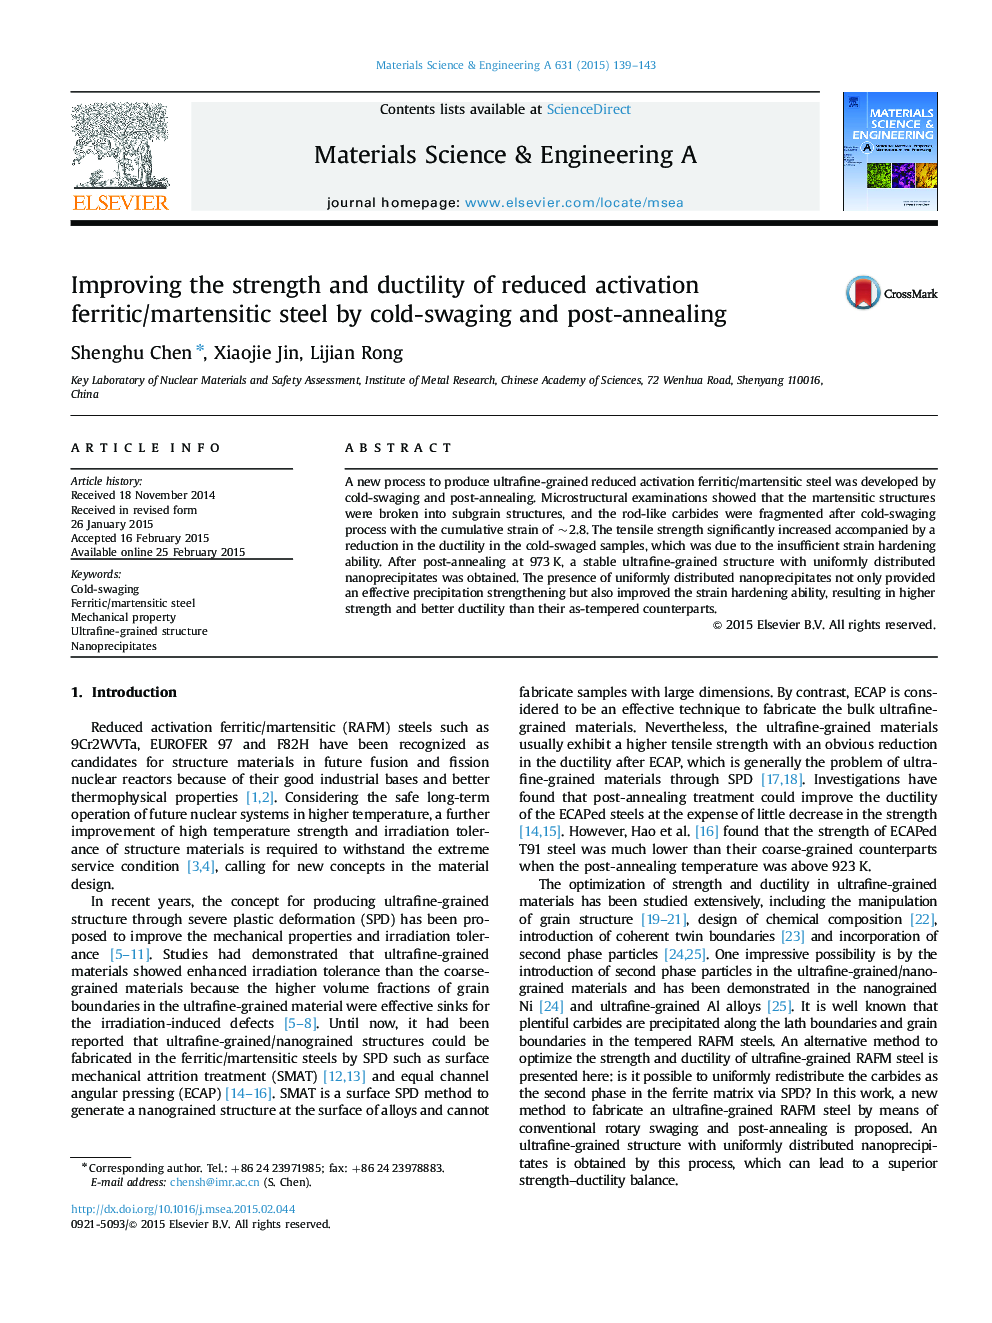 Improving the strength and ductility of reduced activation ferritic/martensitic steel by cold-swaging and post-annealing